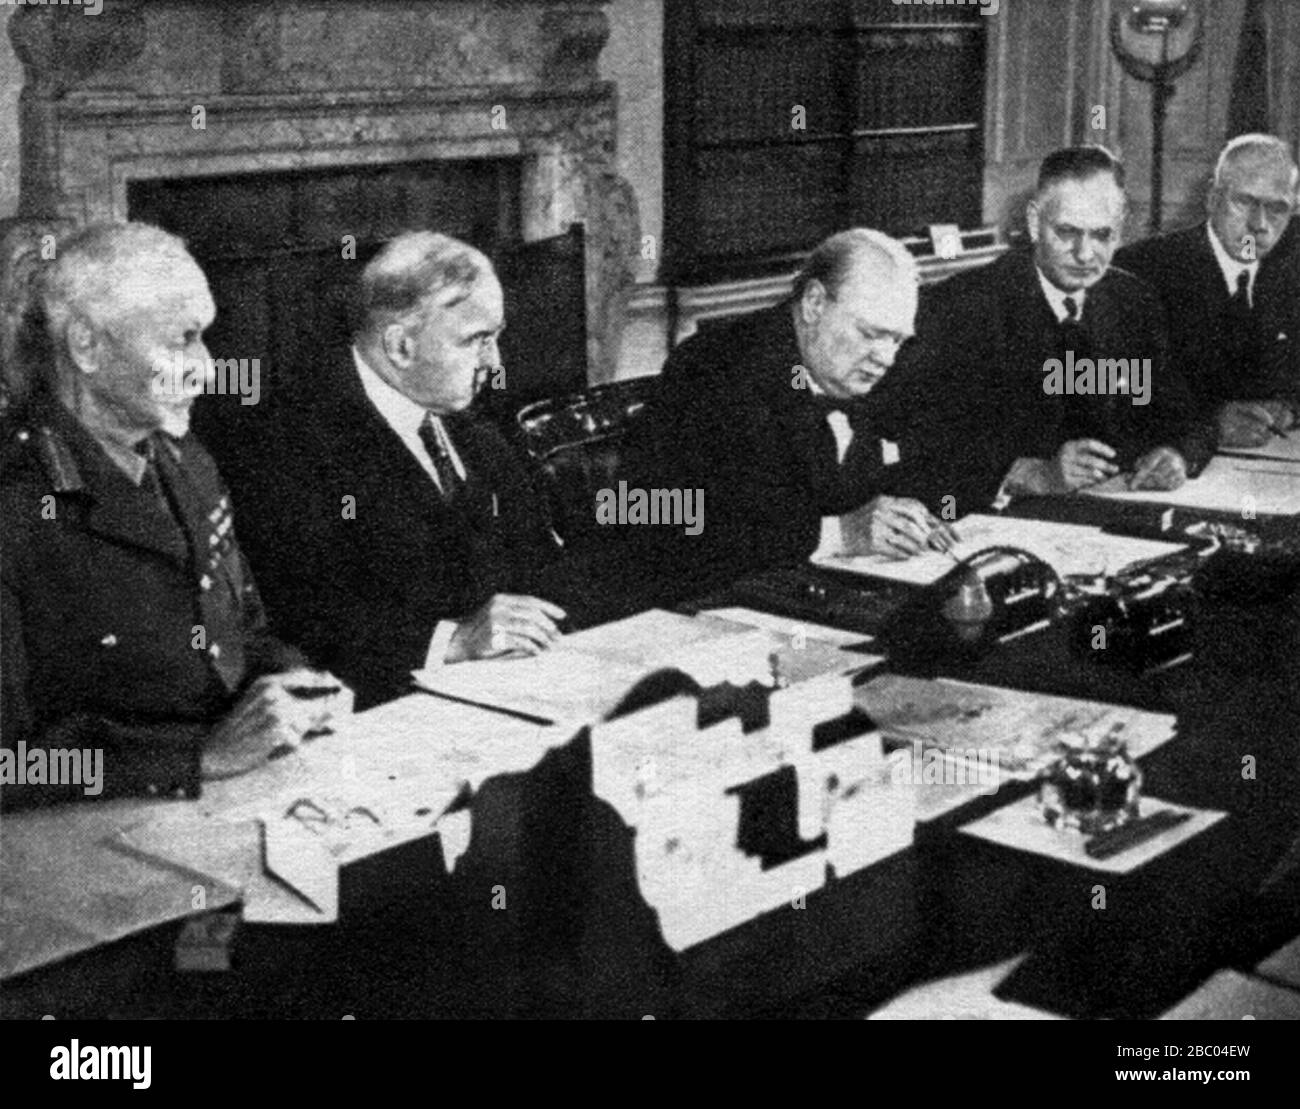 Churchill signing an agreement for Commonwealth solidarity with General Smuts, MacKenzie King and Prime Ministers of Australia and New Zealand.16/5/44 Stock Photo